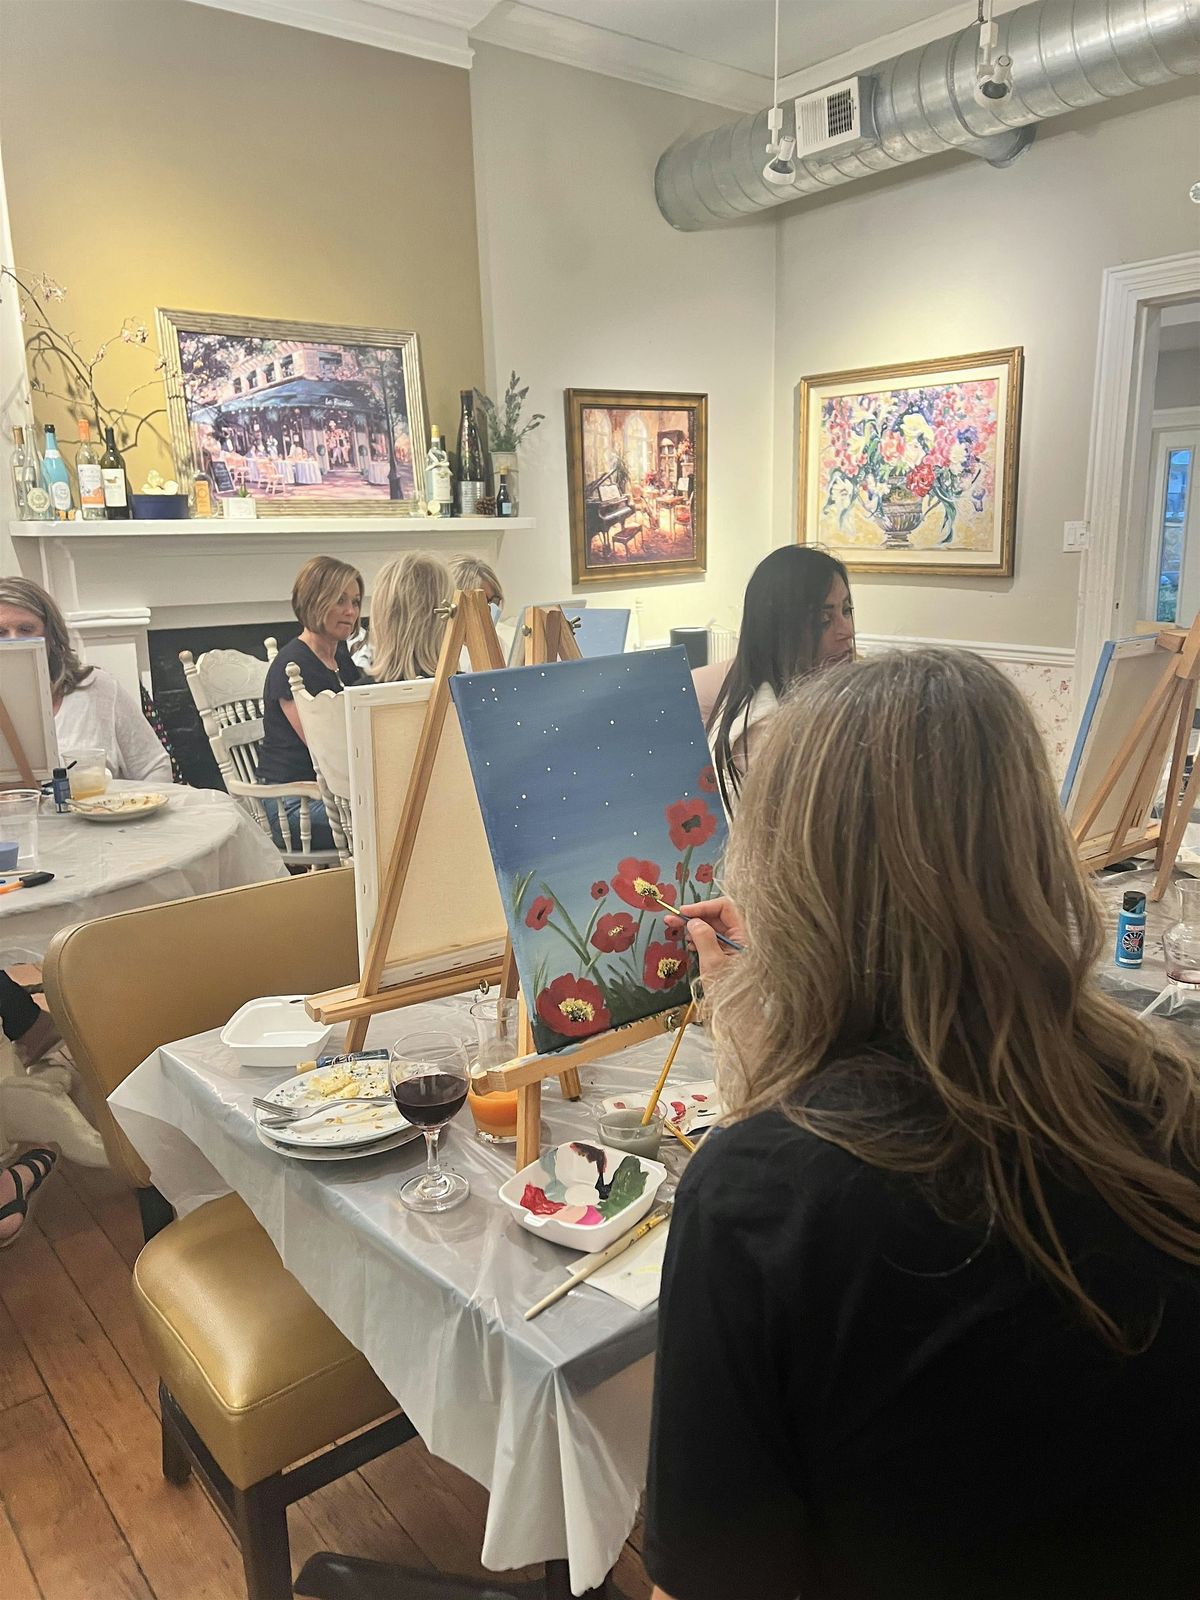 Alberto's Painting Class - Food, Drink, & Supplies Included!